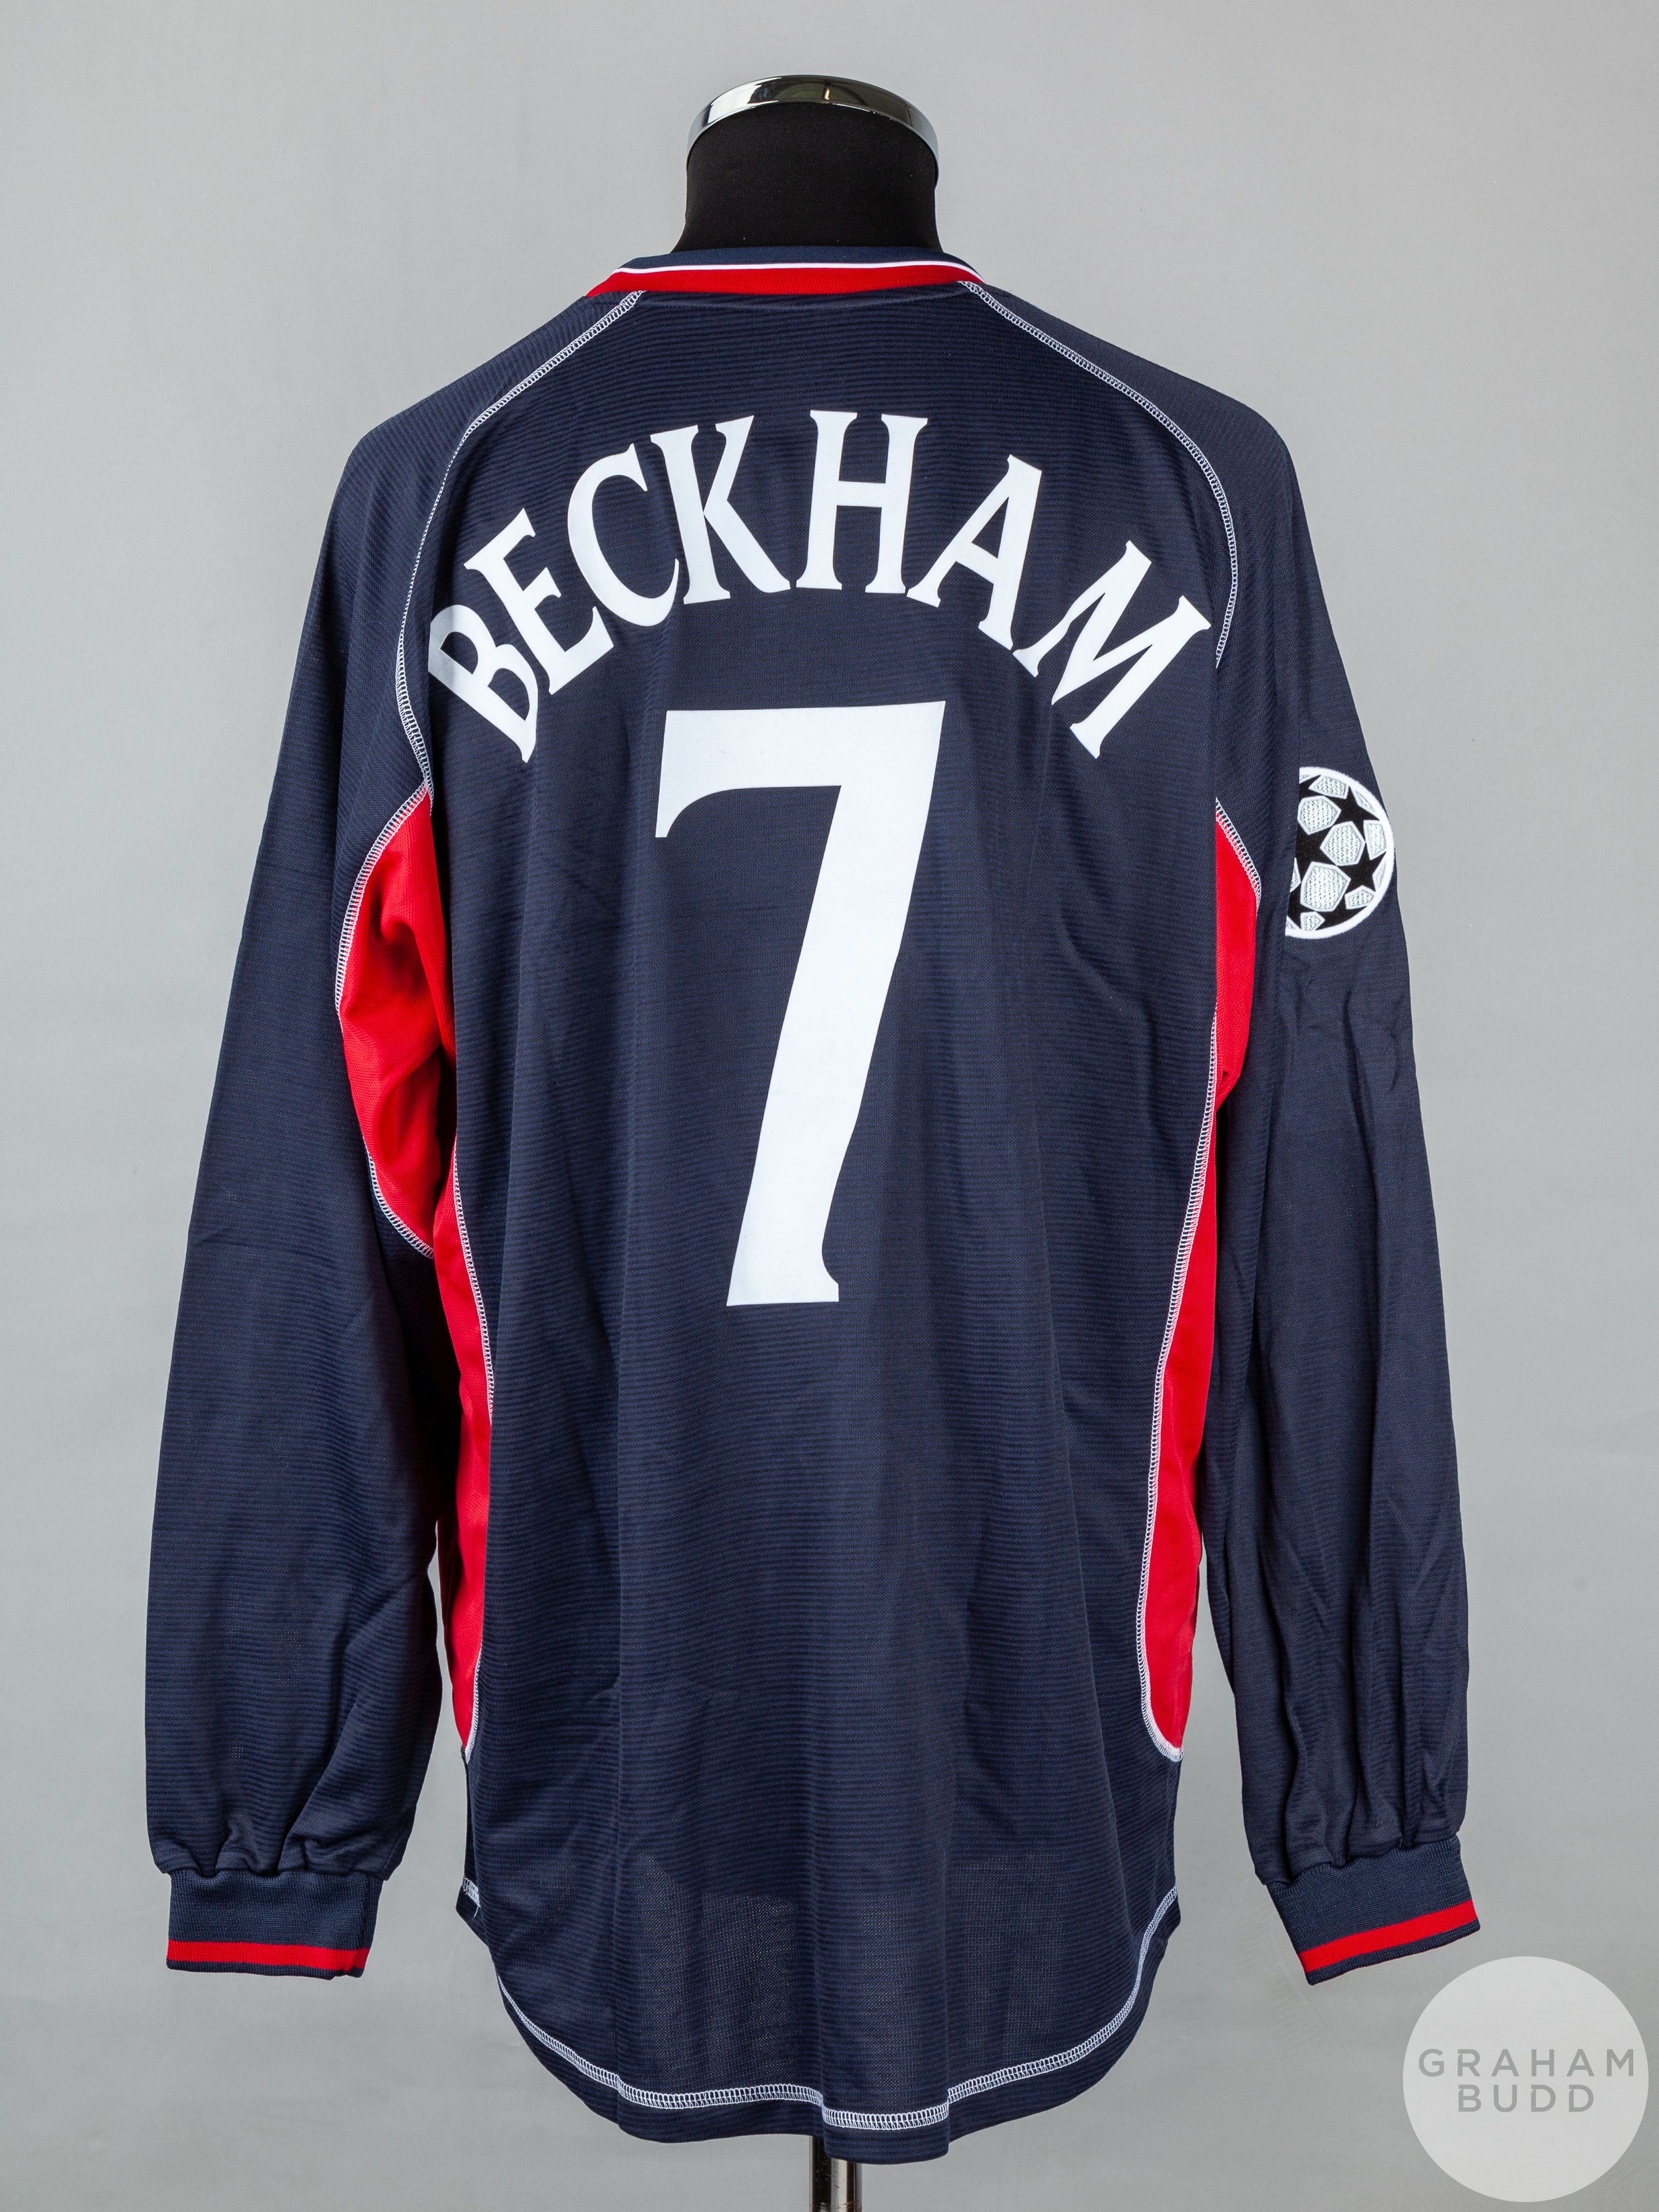 David Beckham blue and red No.7 Manchester United long-sleeve shirt, 2000 - Image 2 of 5